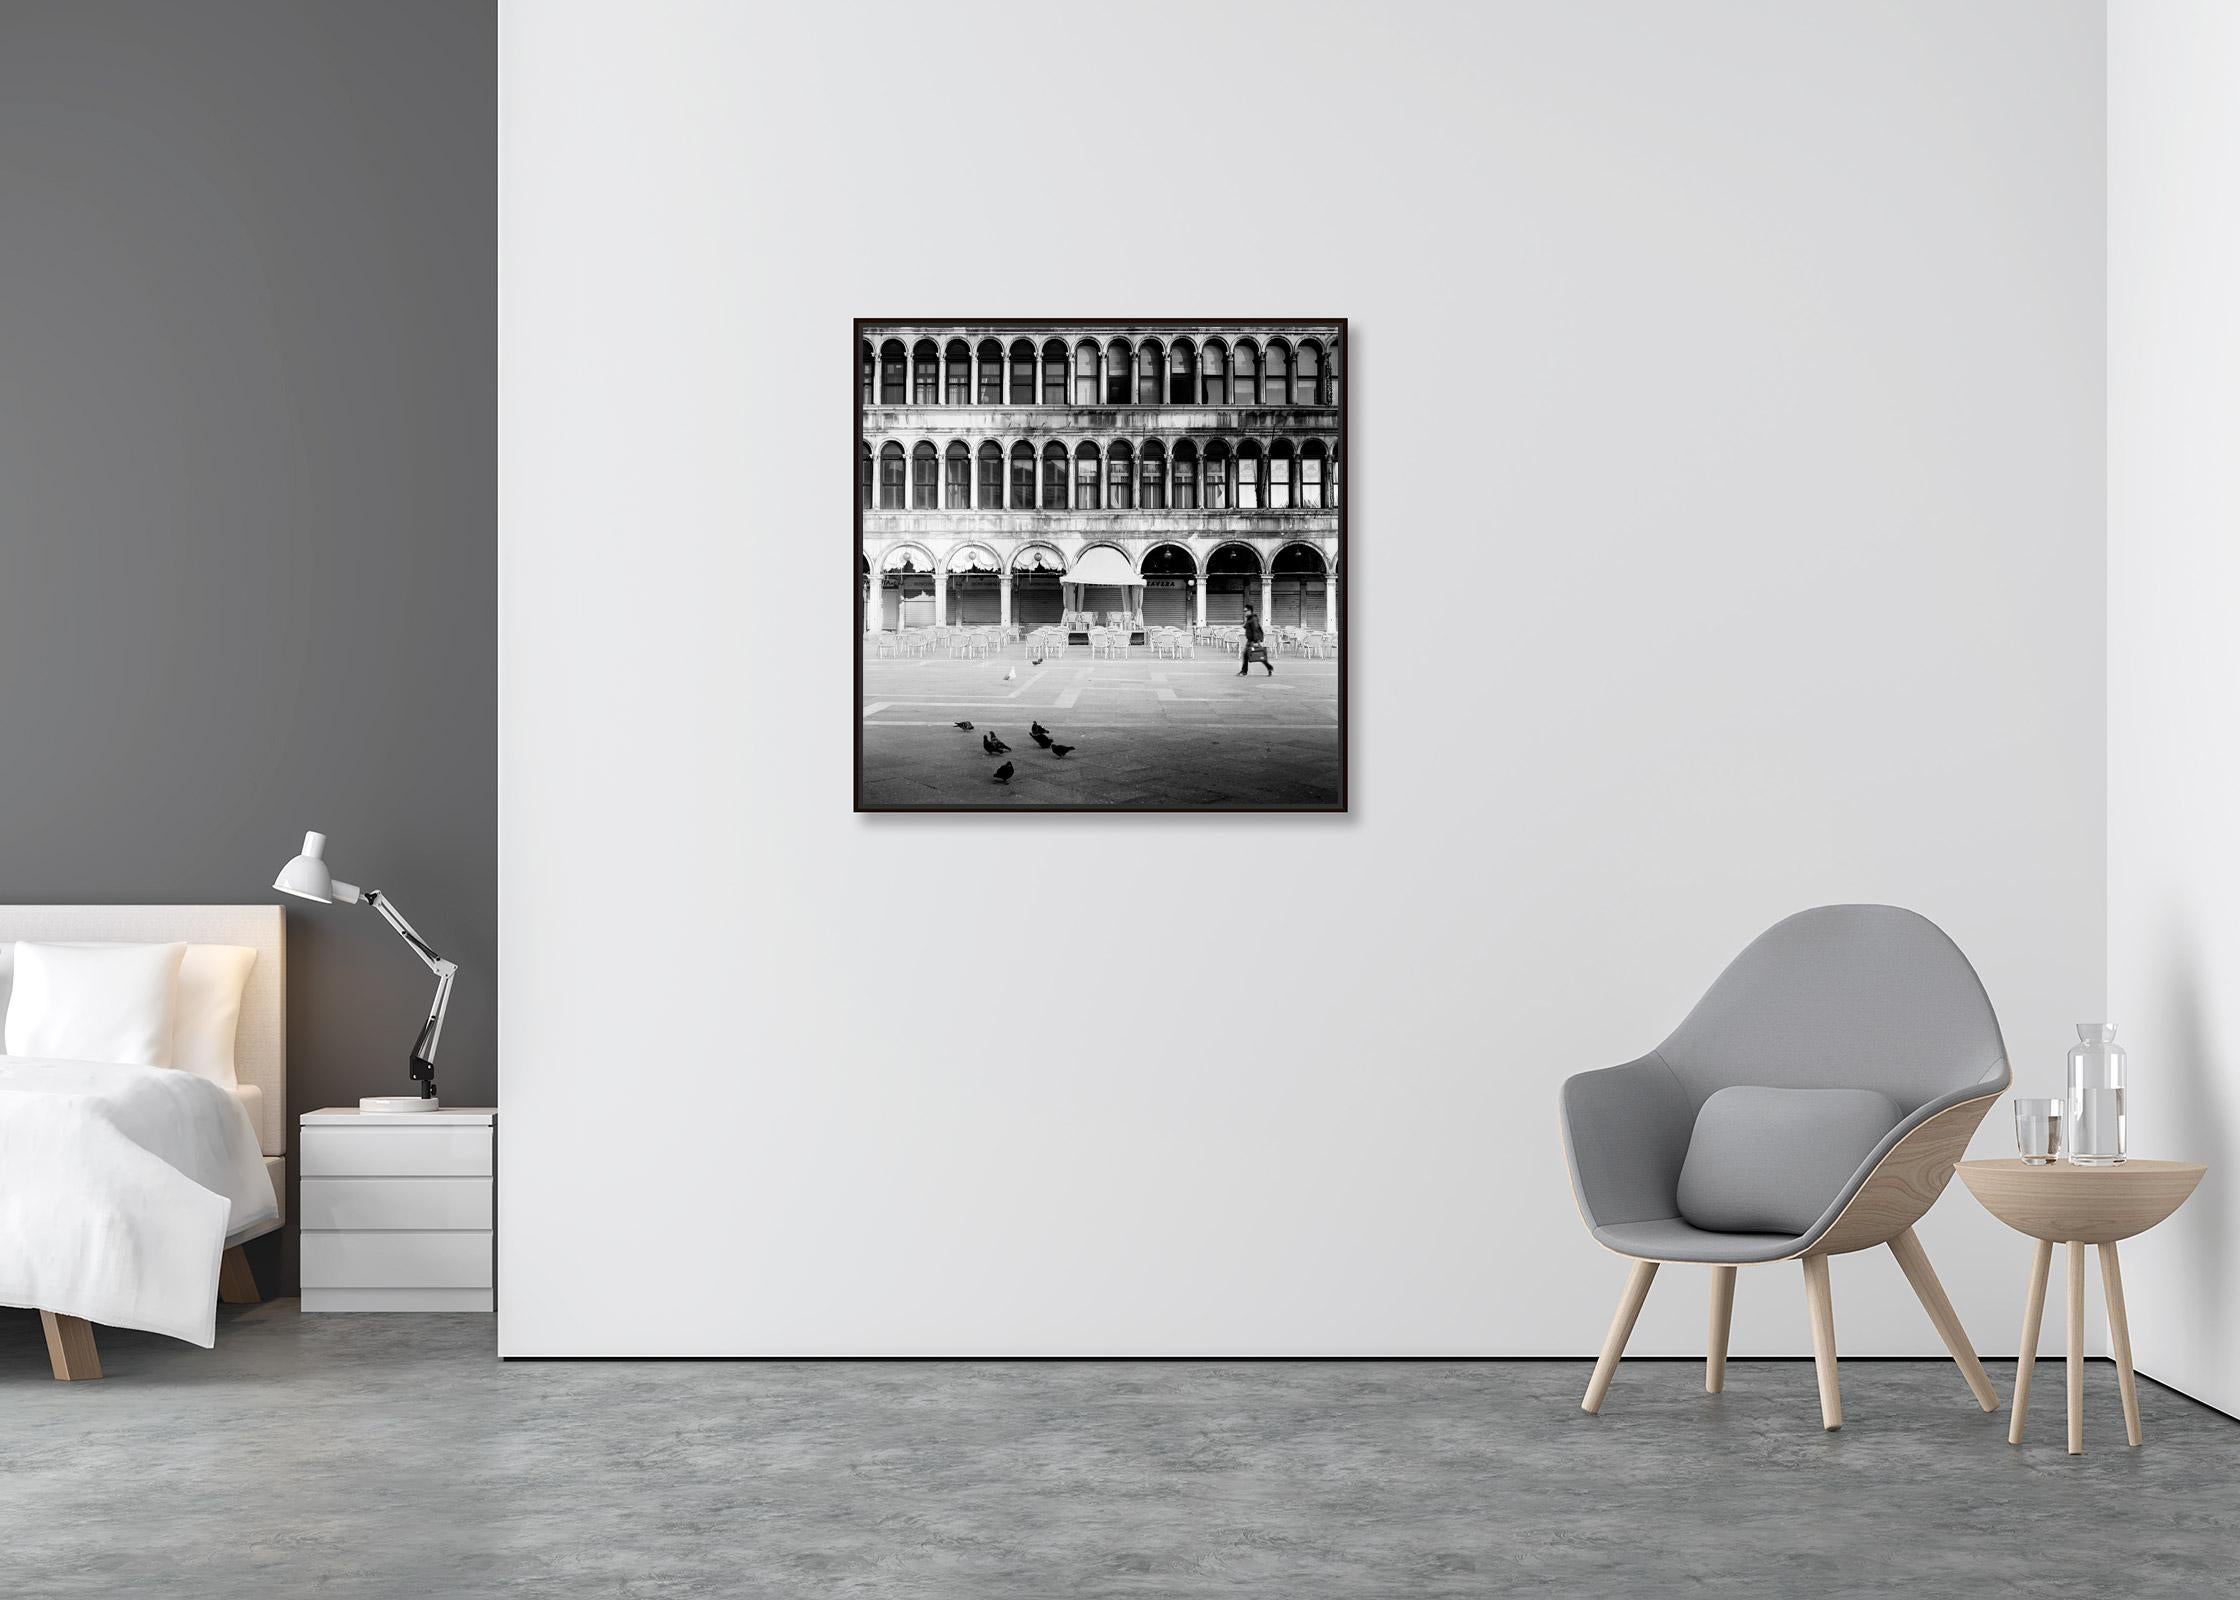 Caffe Florian San Marco Venice black and white fine art cityscape photography - Contemporary Photograph by Gerald Berghammer